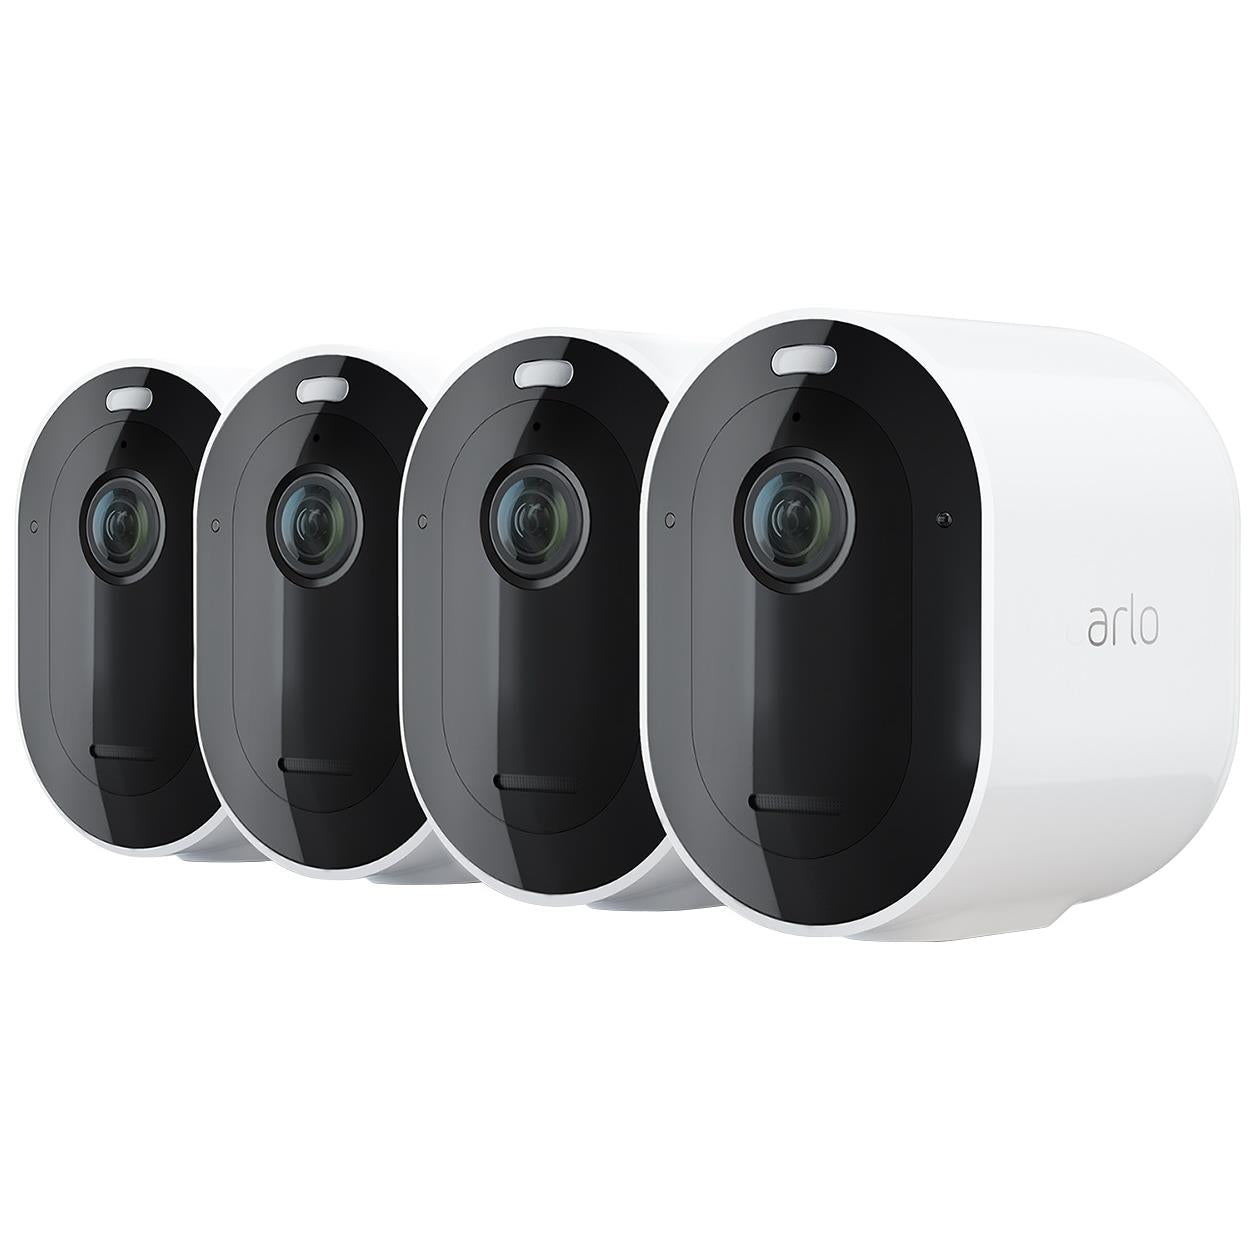 Arlo Pro 4 Spotlight Camera review: all eyes on me - Reviewed